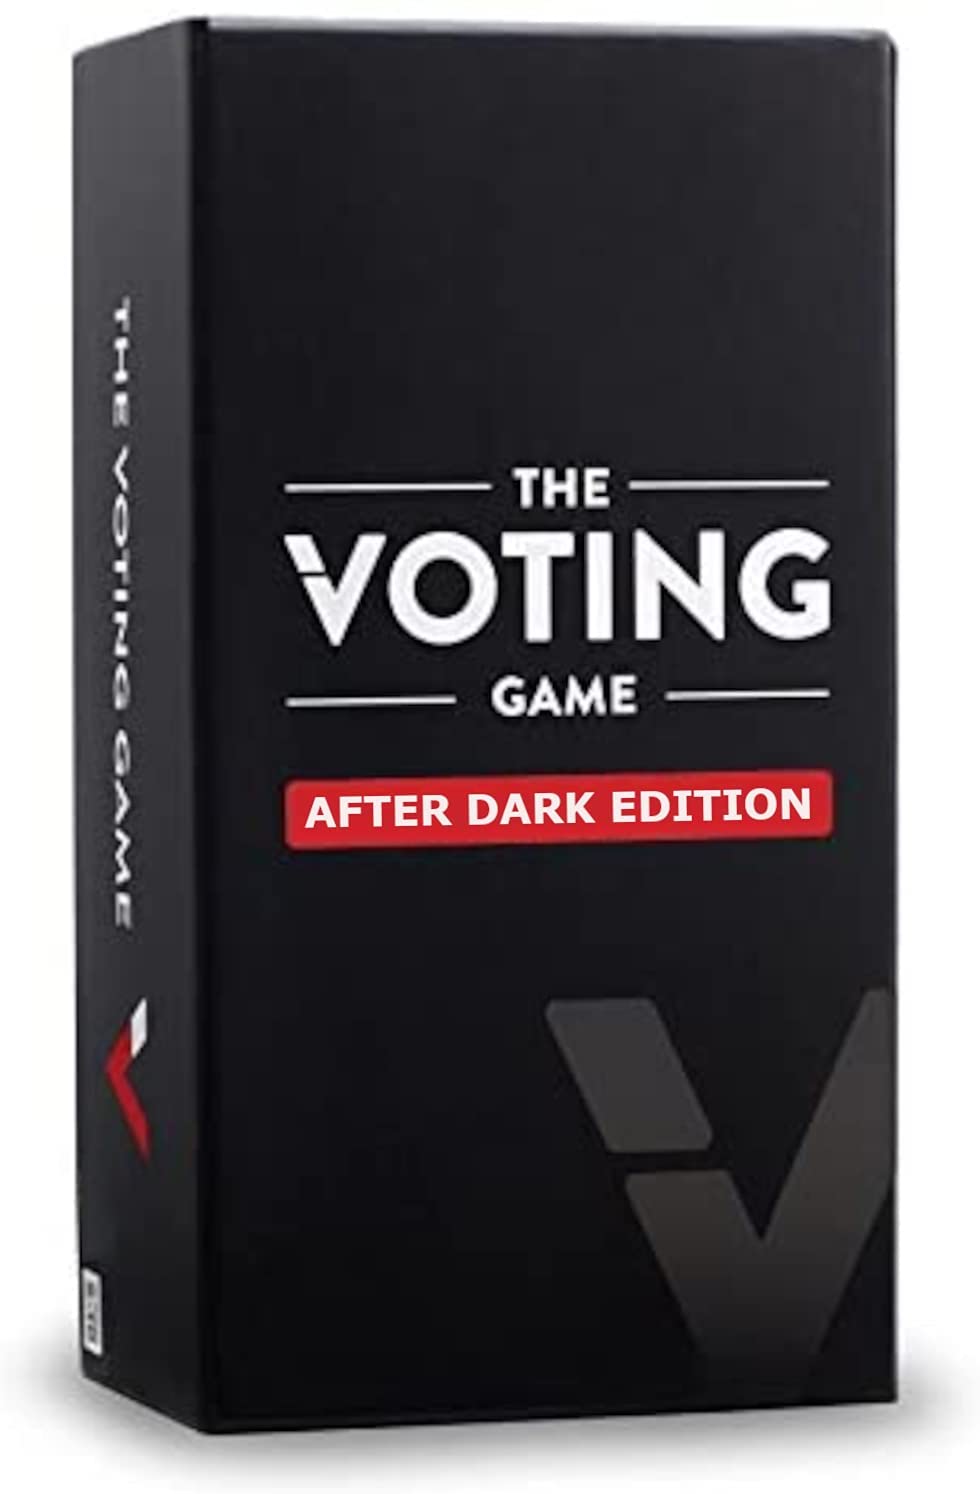 The Voting Game Adult Card Game - The Adult Party Game About Your Friends [NSFW